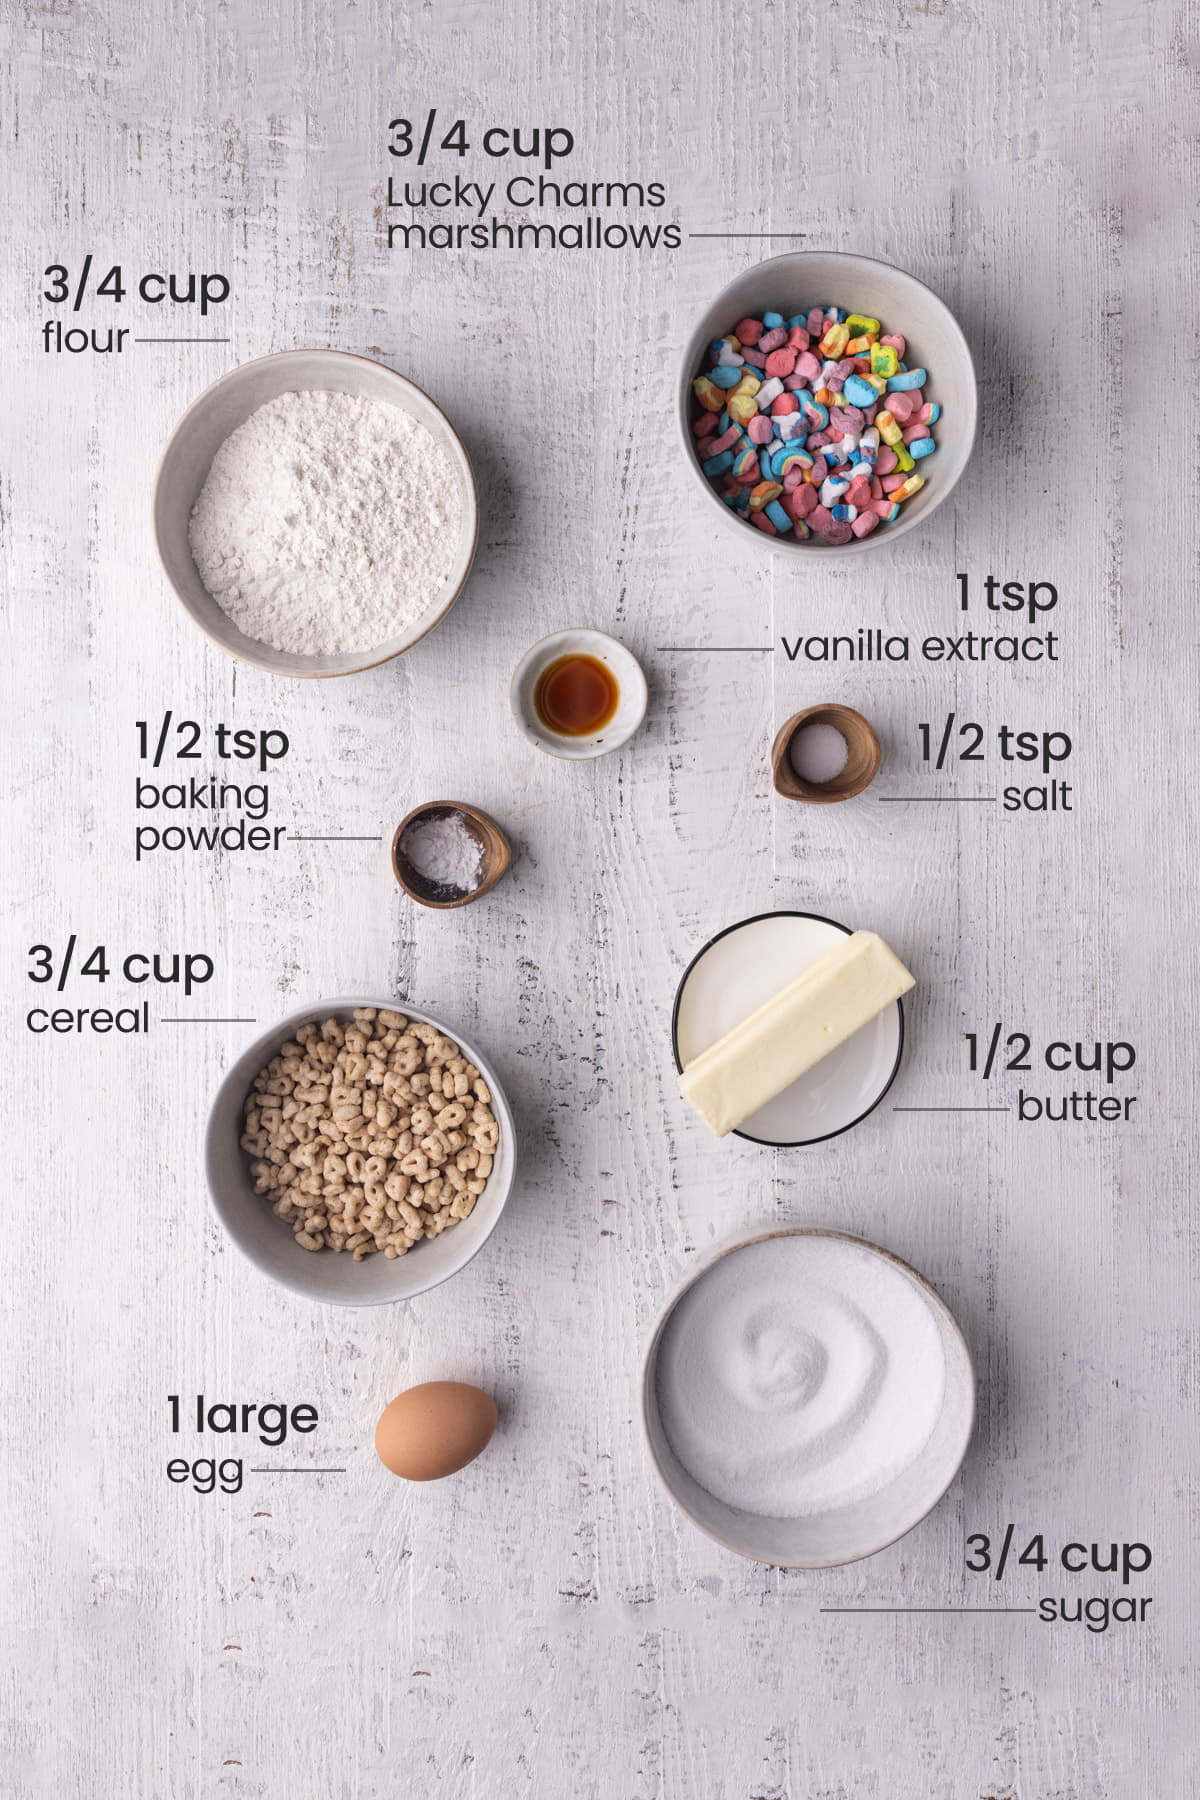 all ingredients for Lucky Charms cookies, including flour, Lucky Charms marshmallows, vanilla extract, baking powder, salt, Lucky Charms cereal, butter, egg, sugar